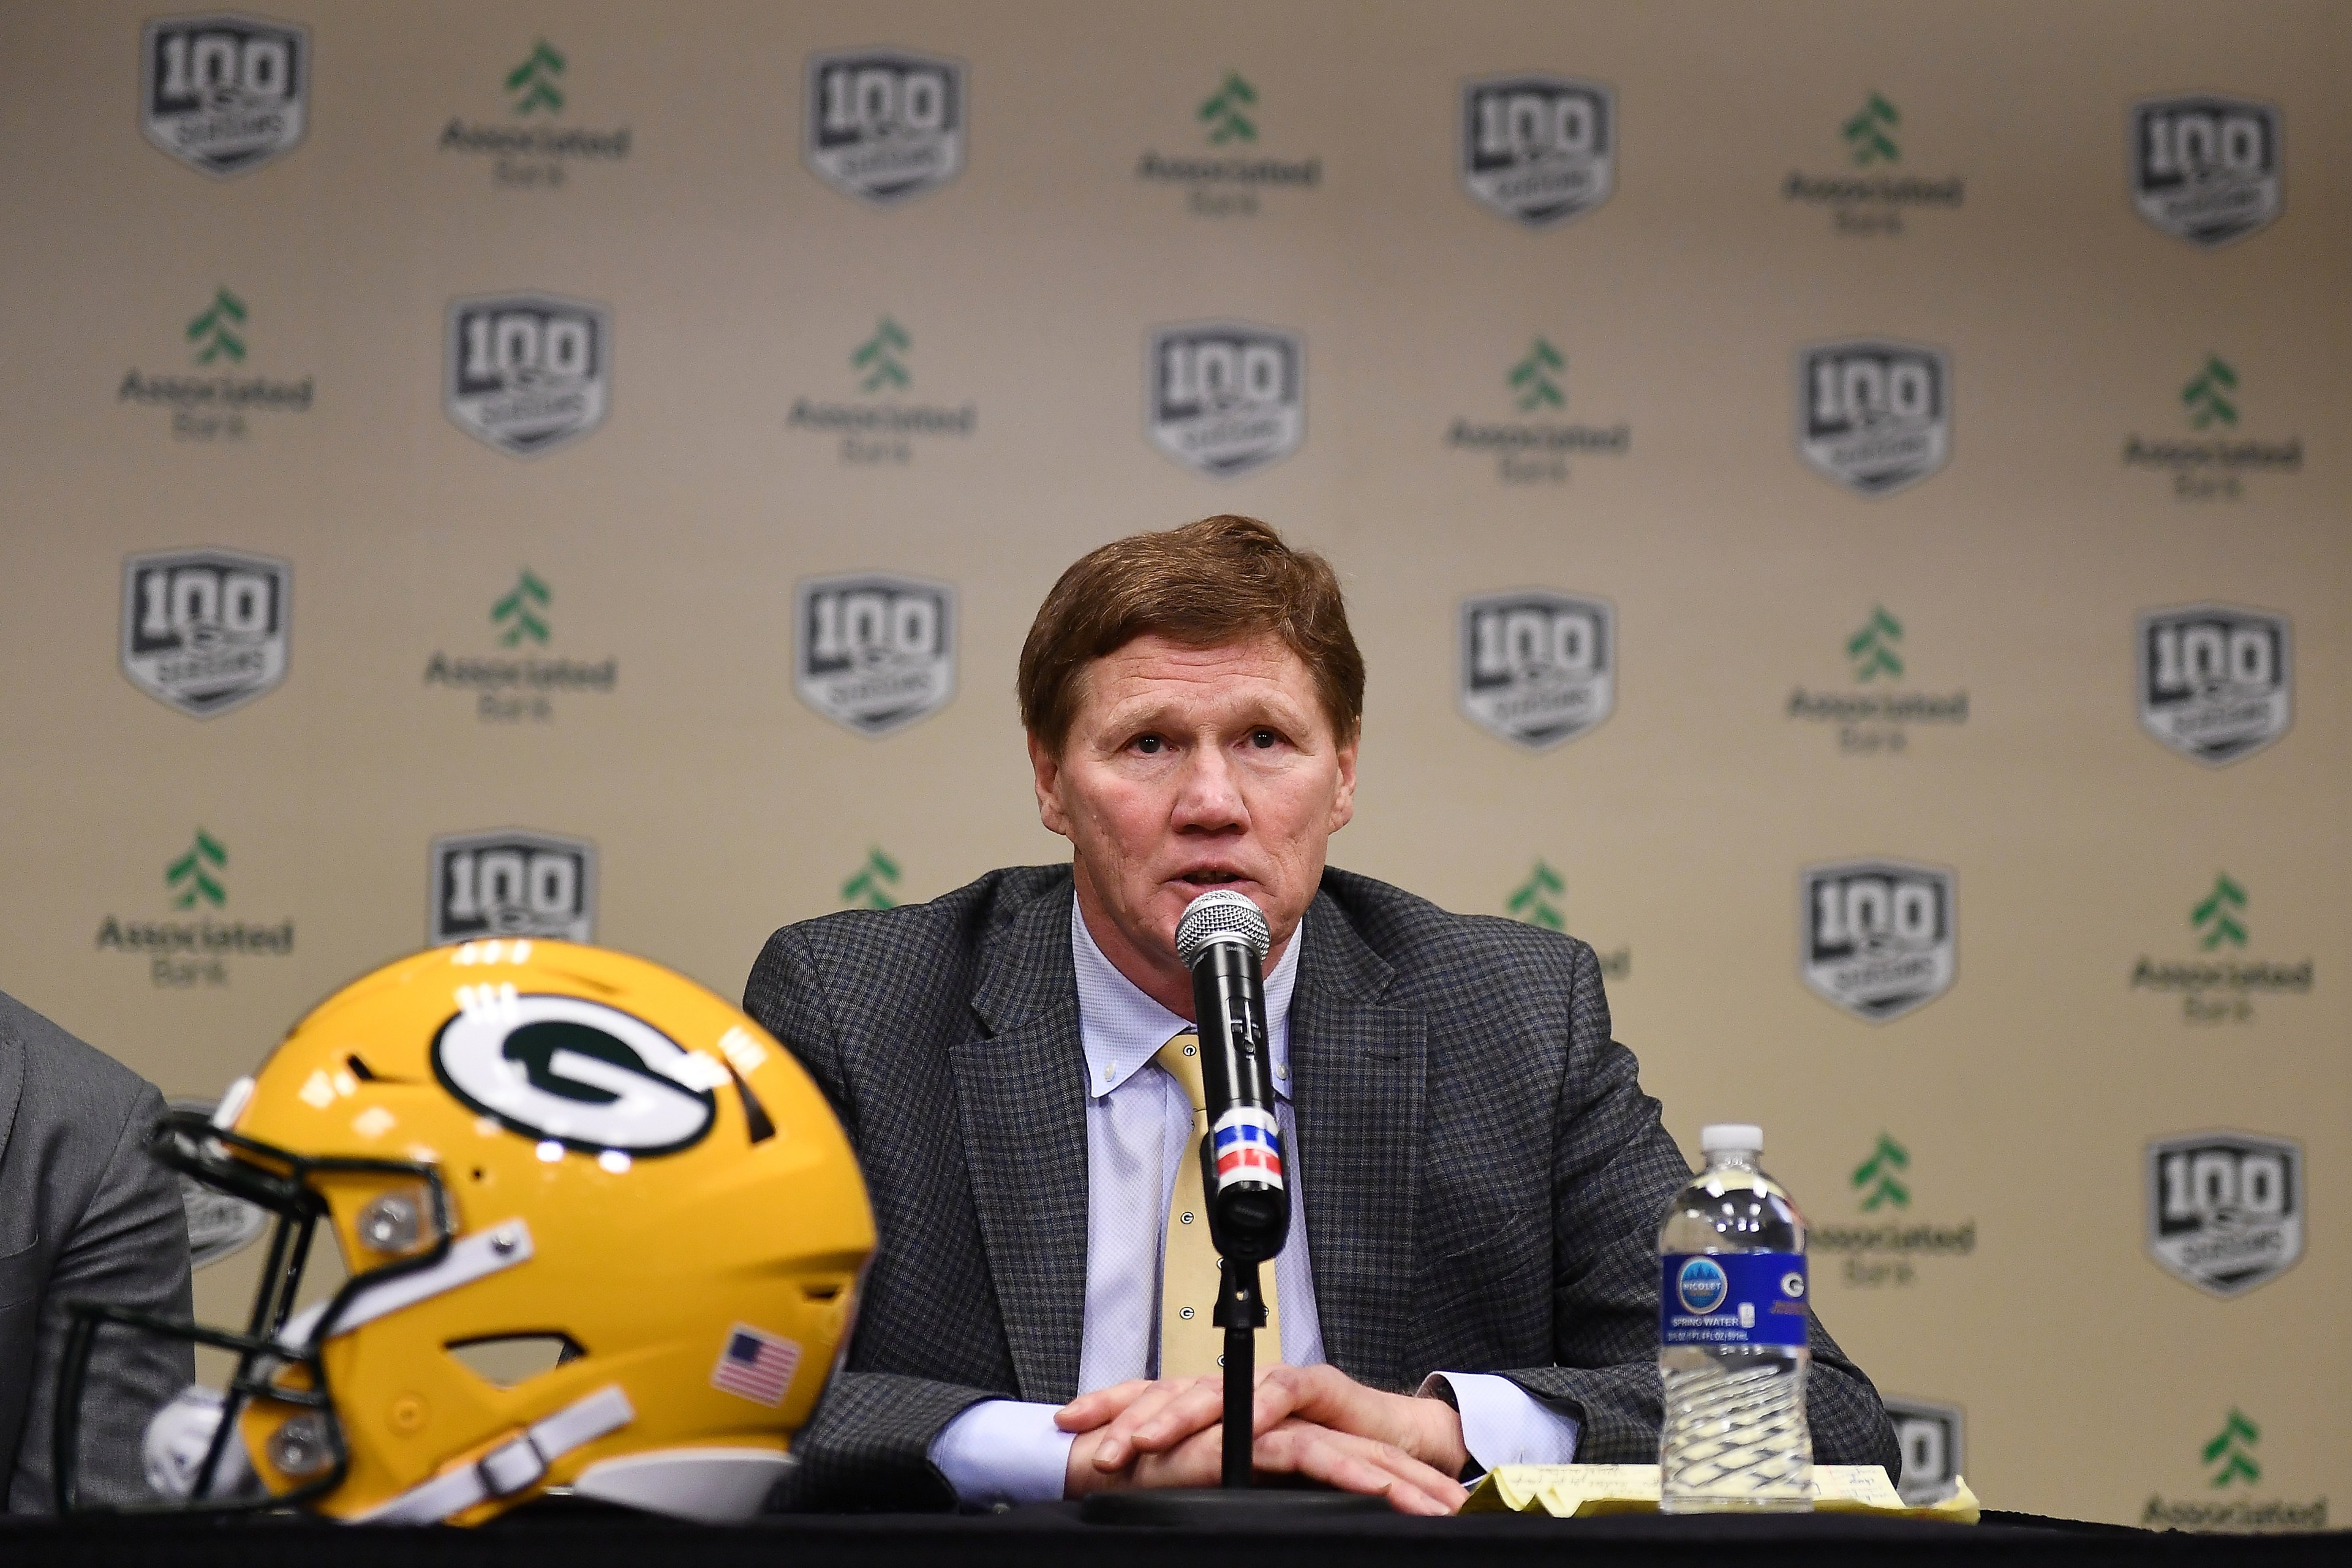 GREEN BAY, WISCONSIN - JANUARY 09: President and CEO of Green Bay Packers Mark Murphy introduces Matt LaFleur (not in frame) as head coach of the Green Bay Packers at Lambeau Field on January 09, 2019 in Green Bay, Wisconsin.